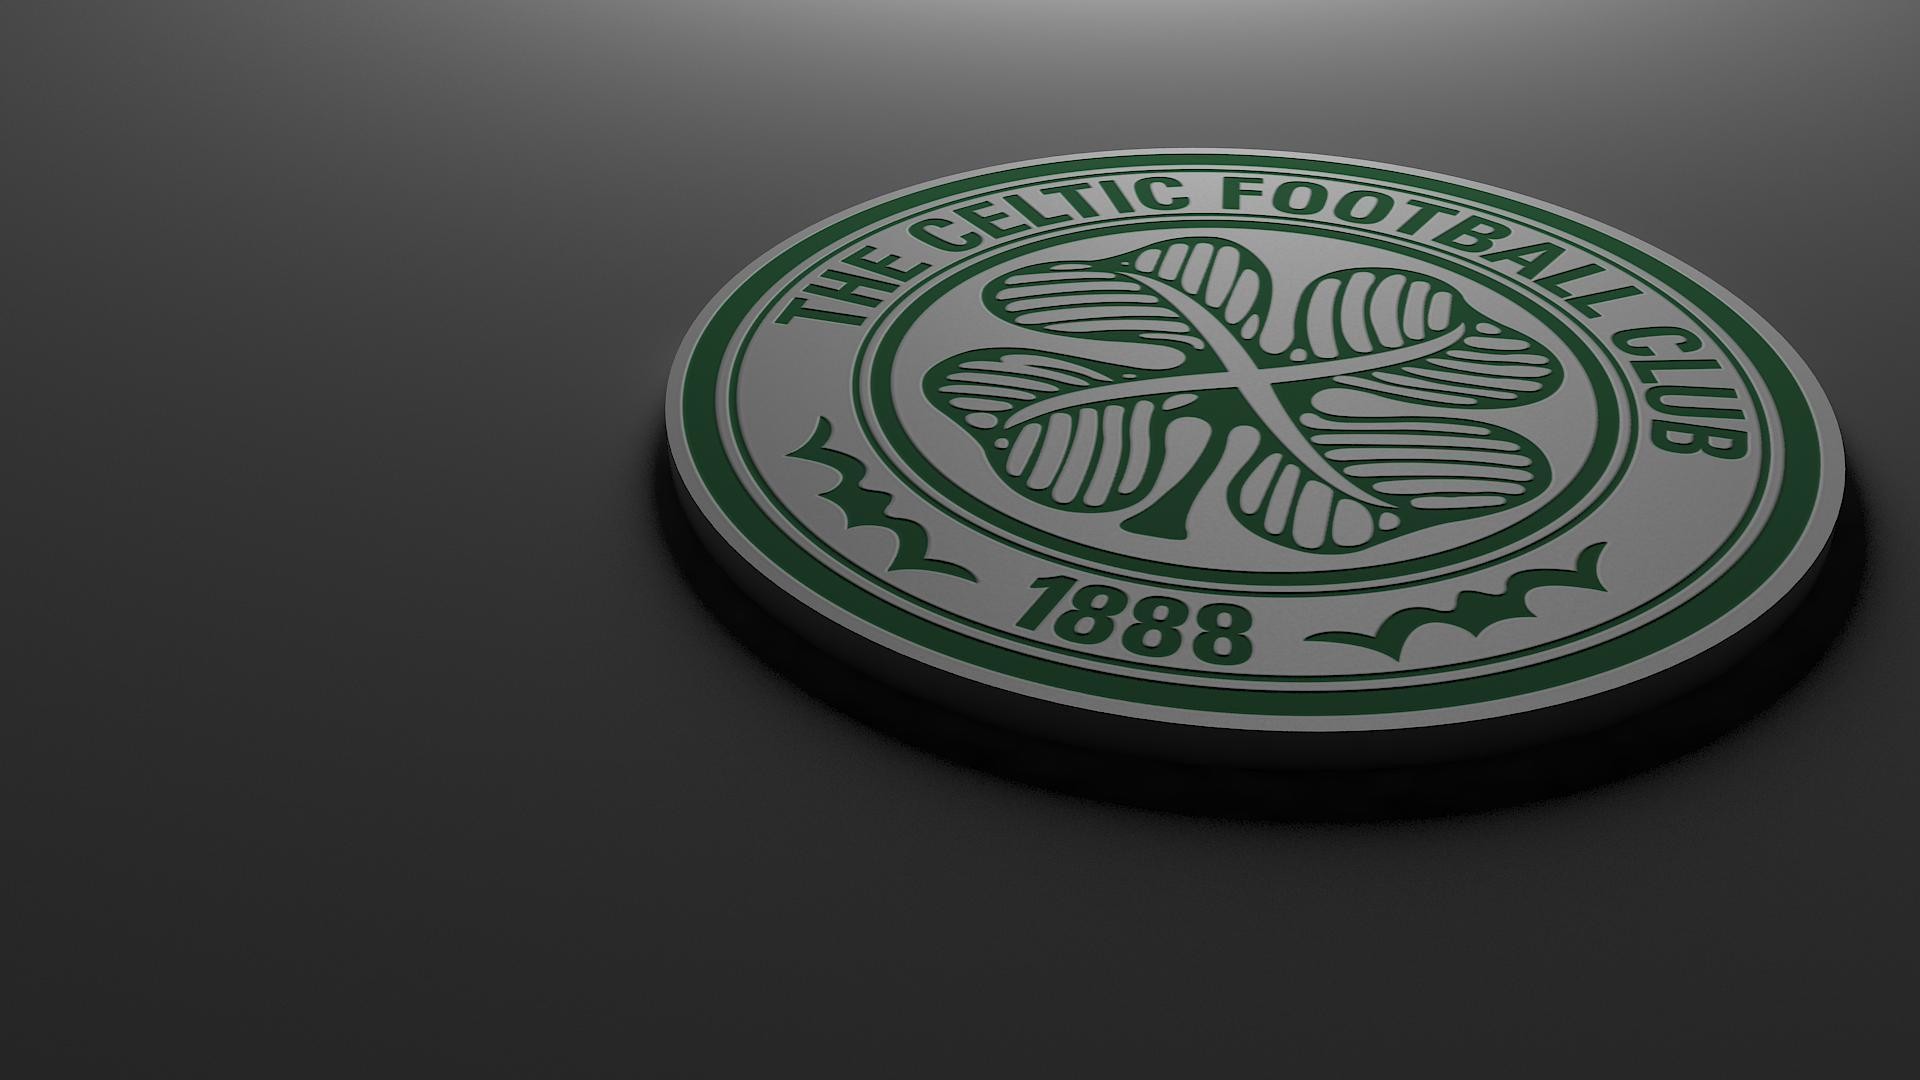 Celtic Football Club images celtic wallpaper and background photos